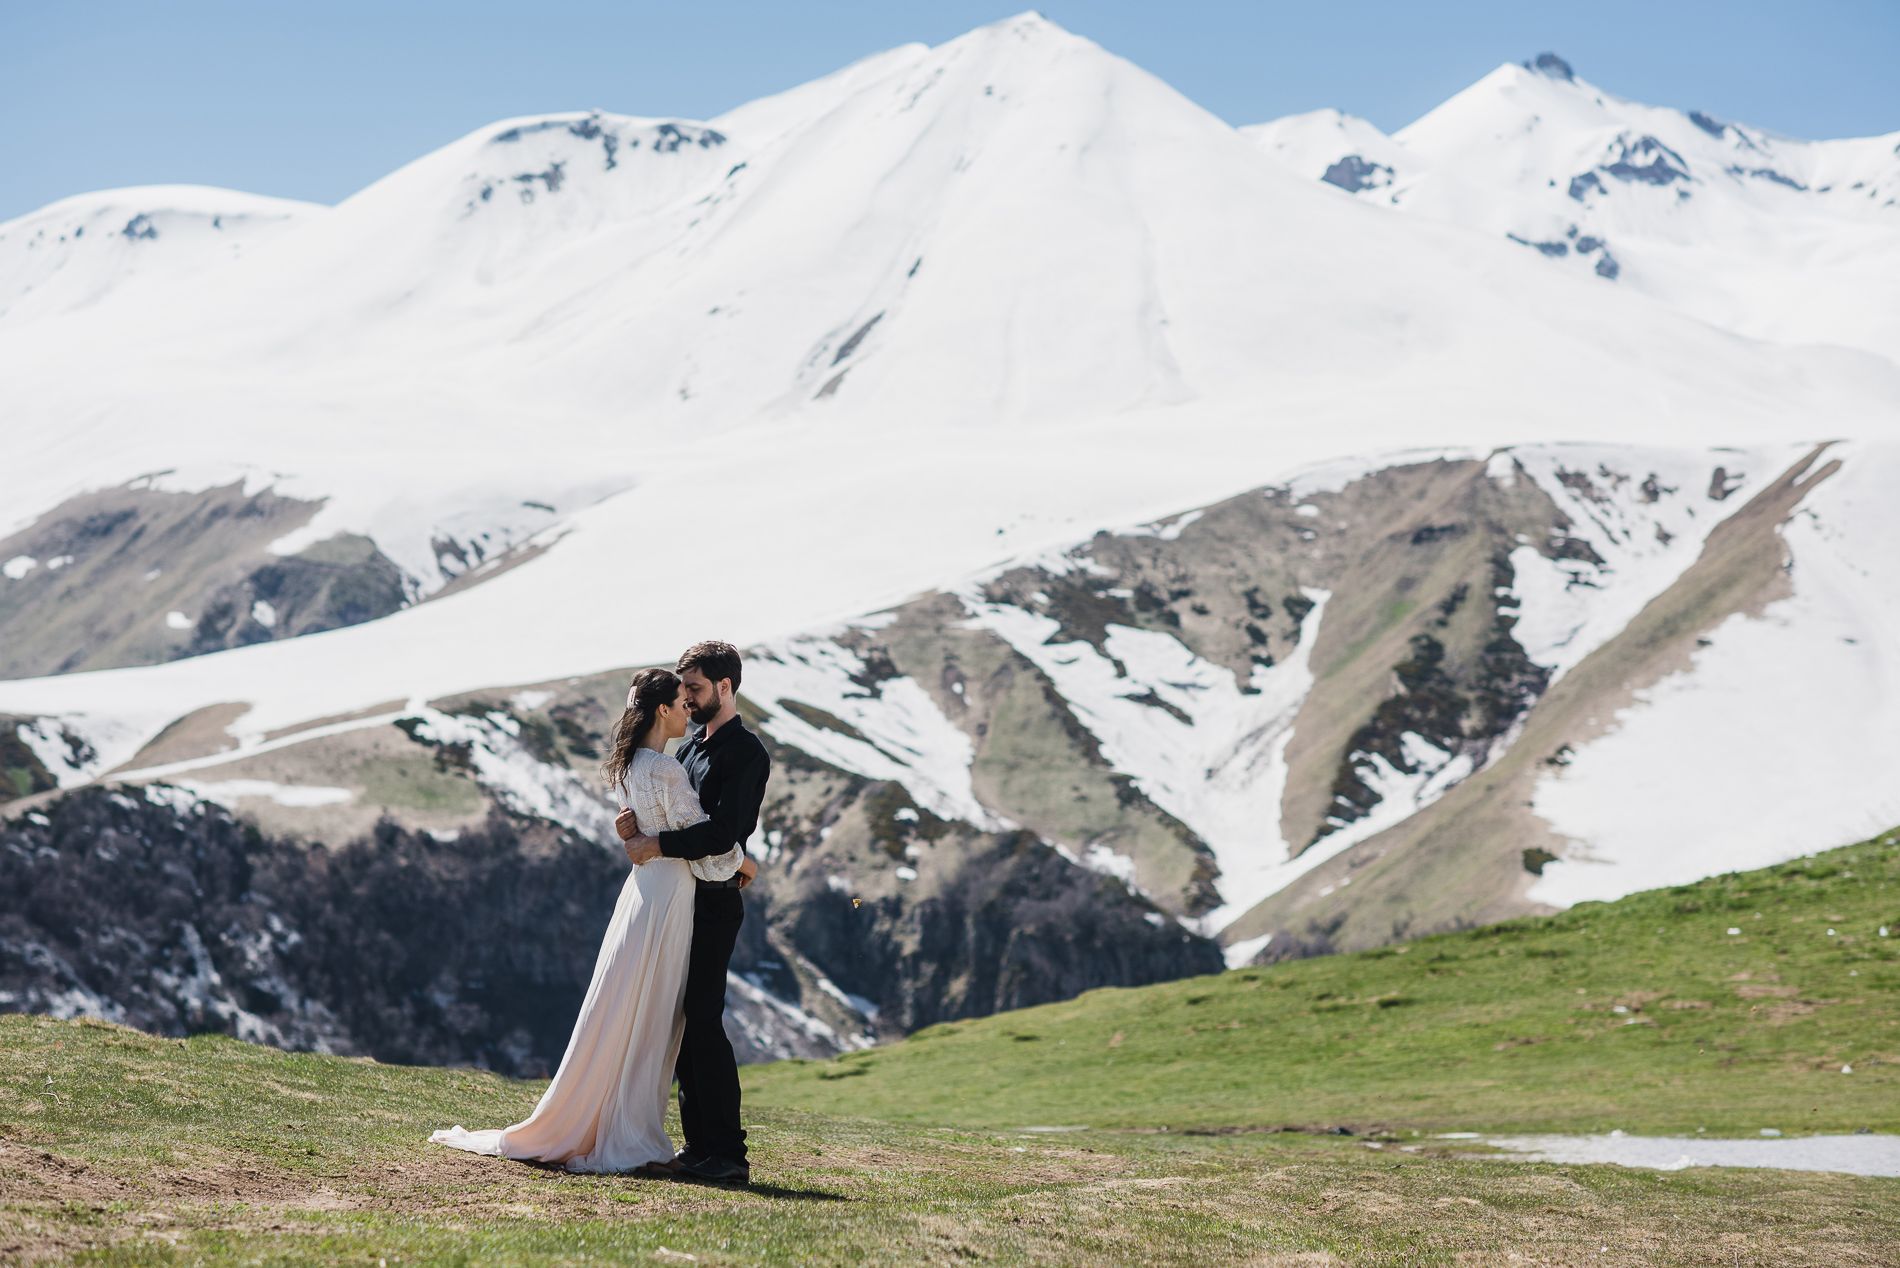 Bride in groom embrace at foot of mountains